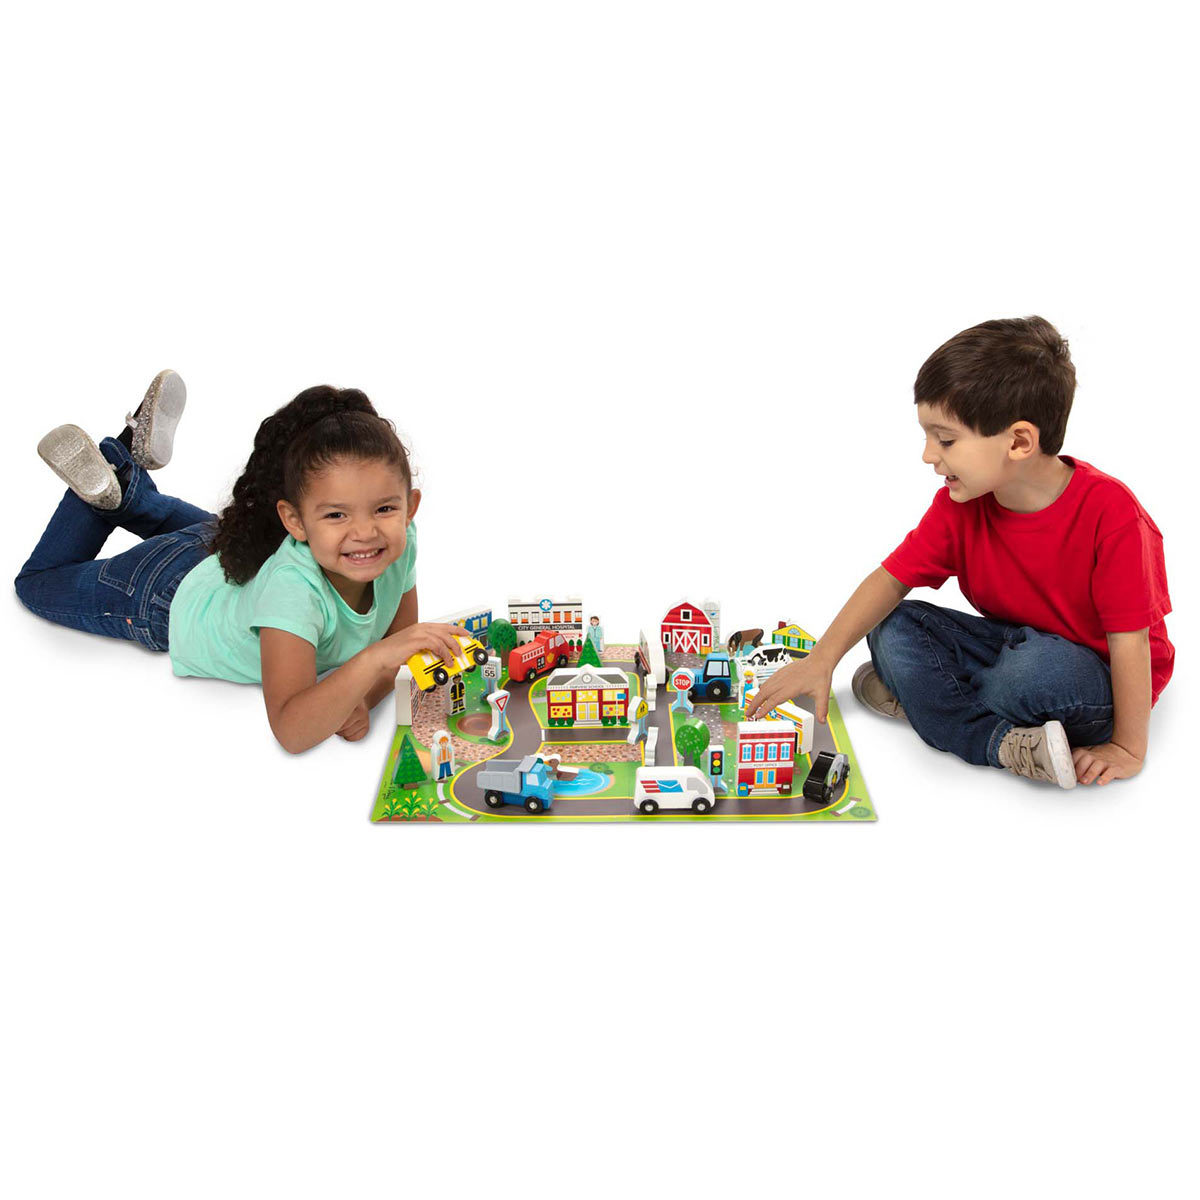 Deluze Wooden town and vehicle playset lifestyle image